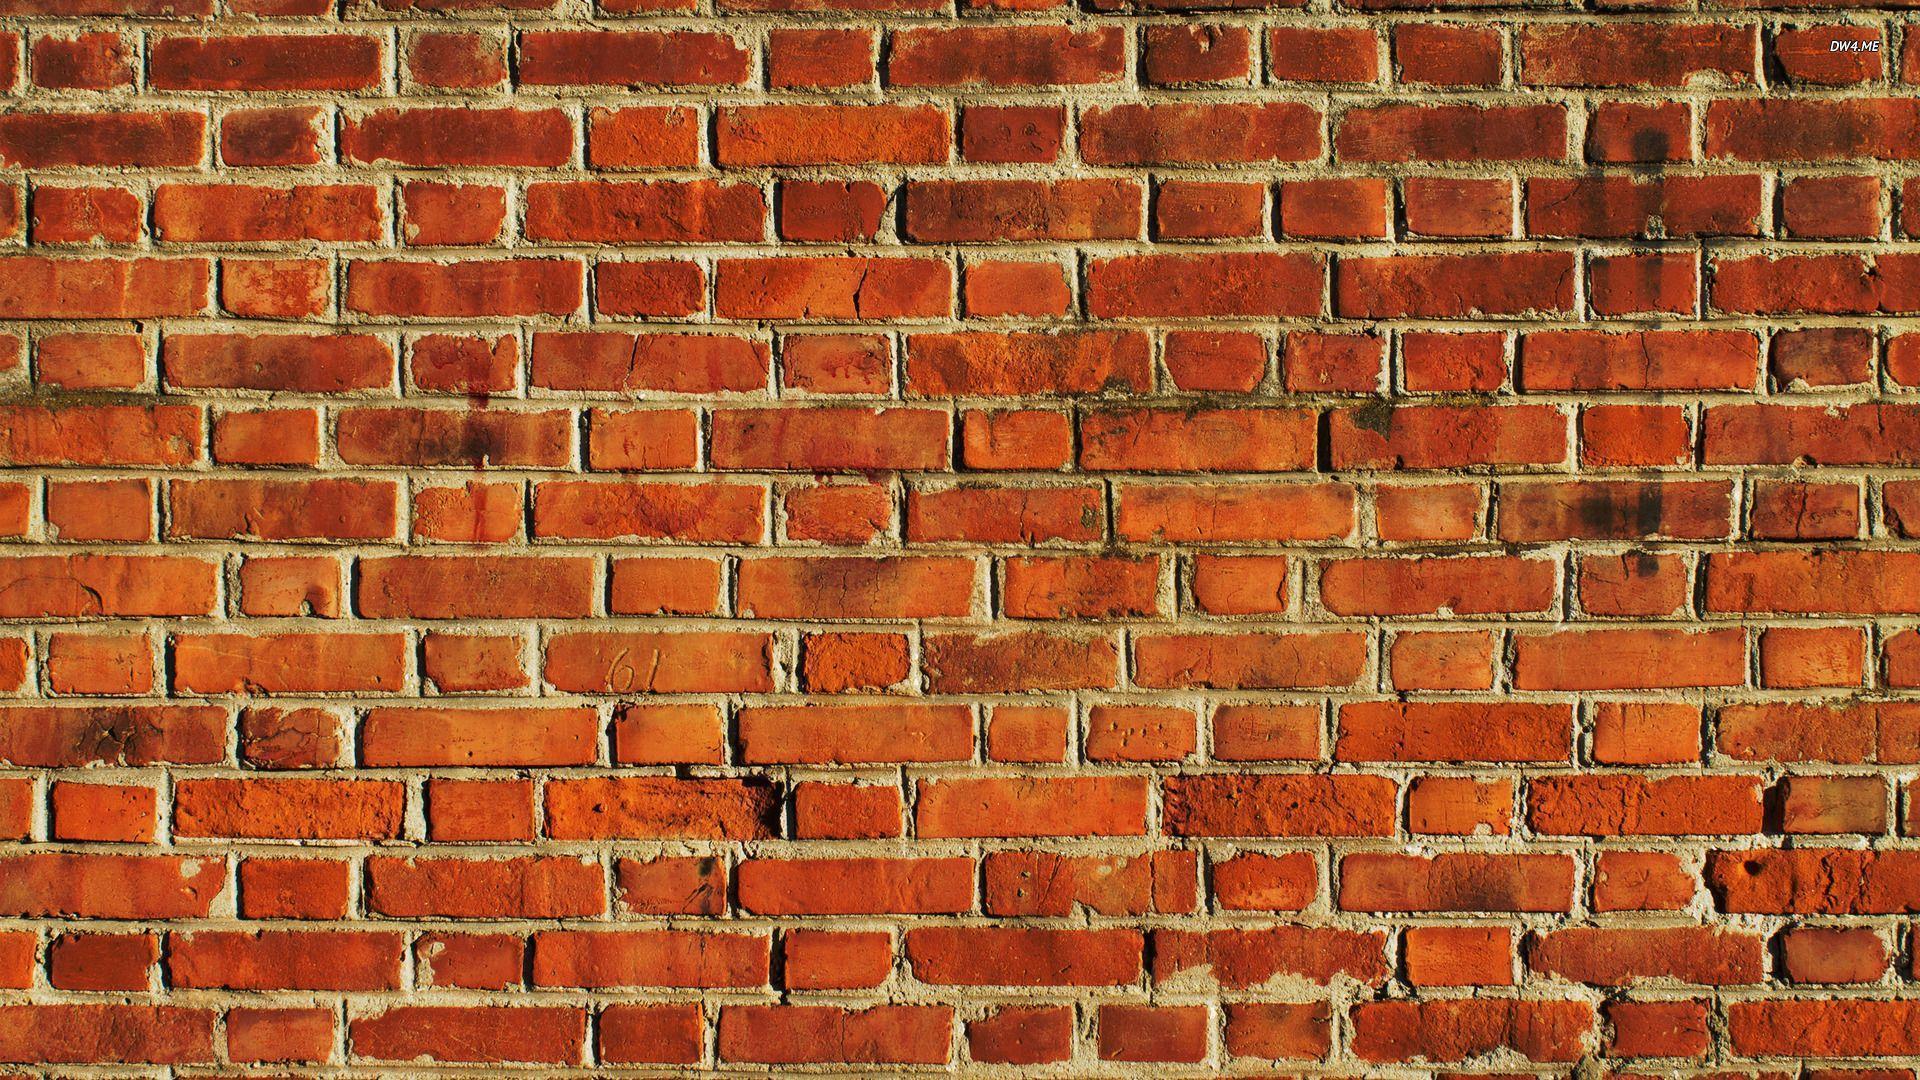 Handpicked Brick Wallpaper For Free Download